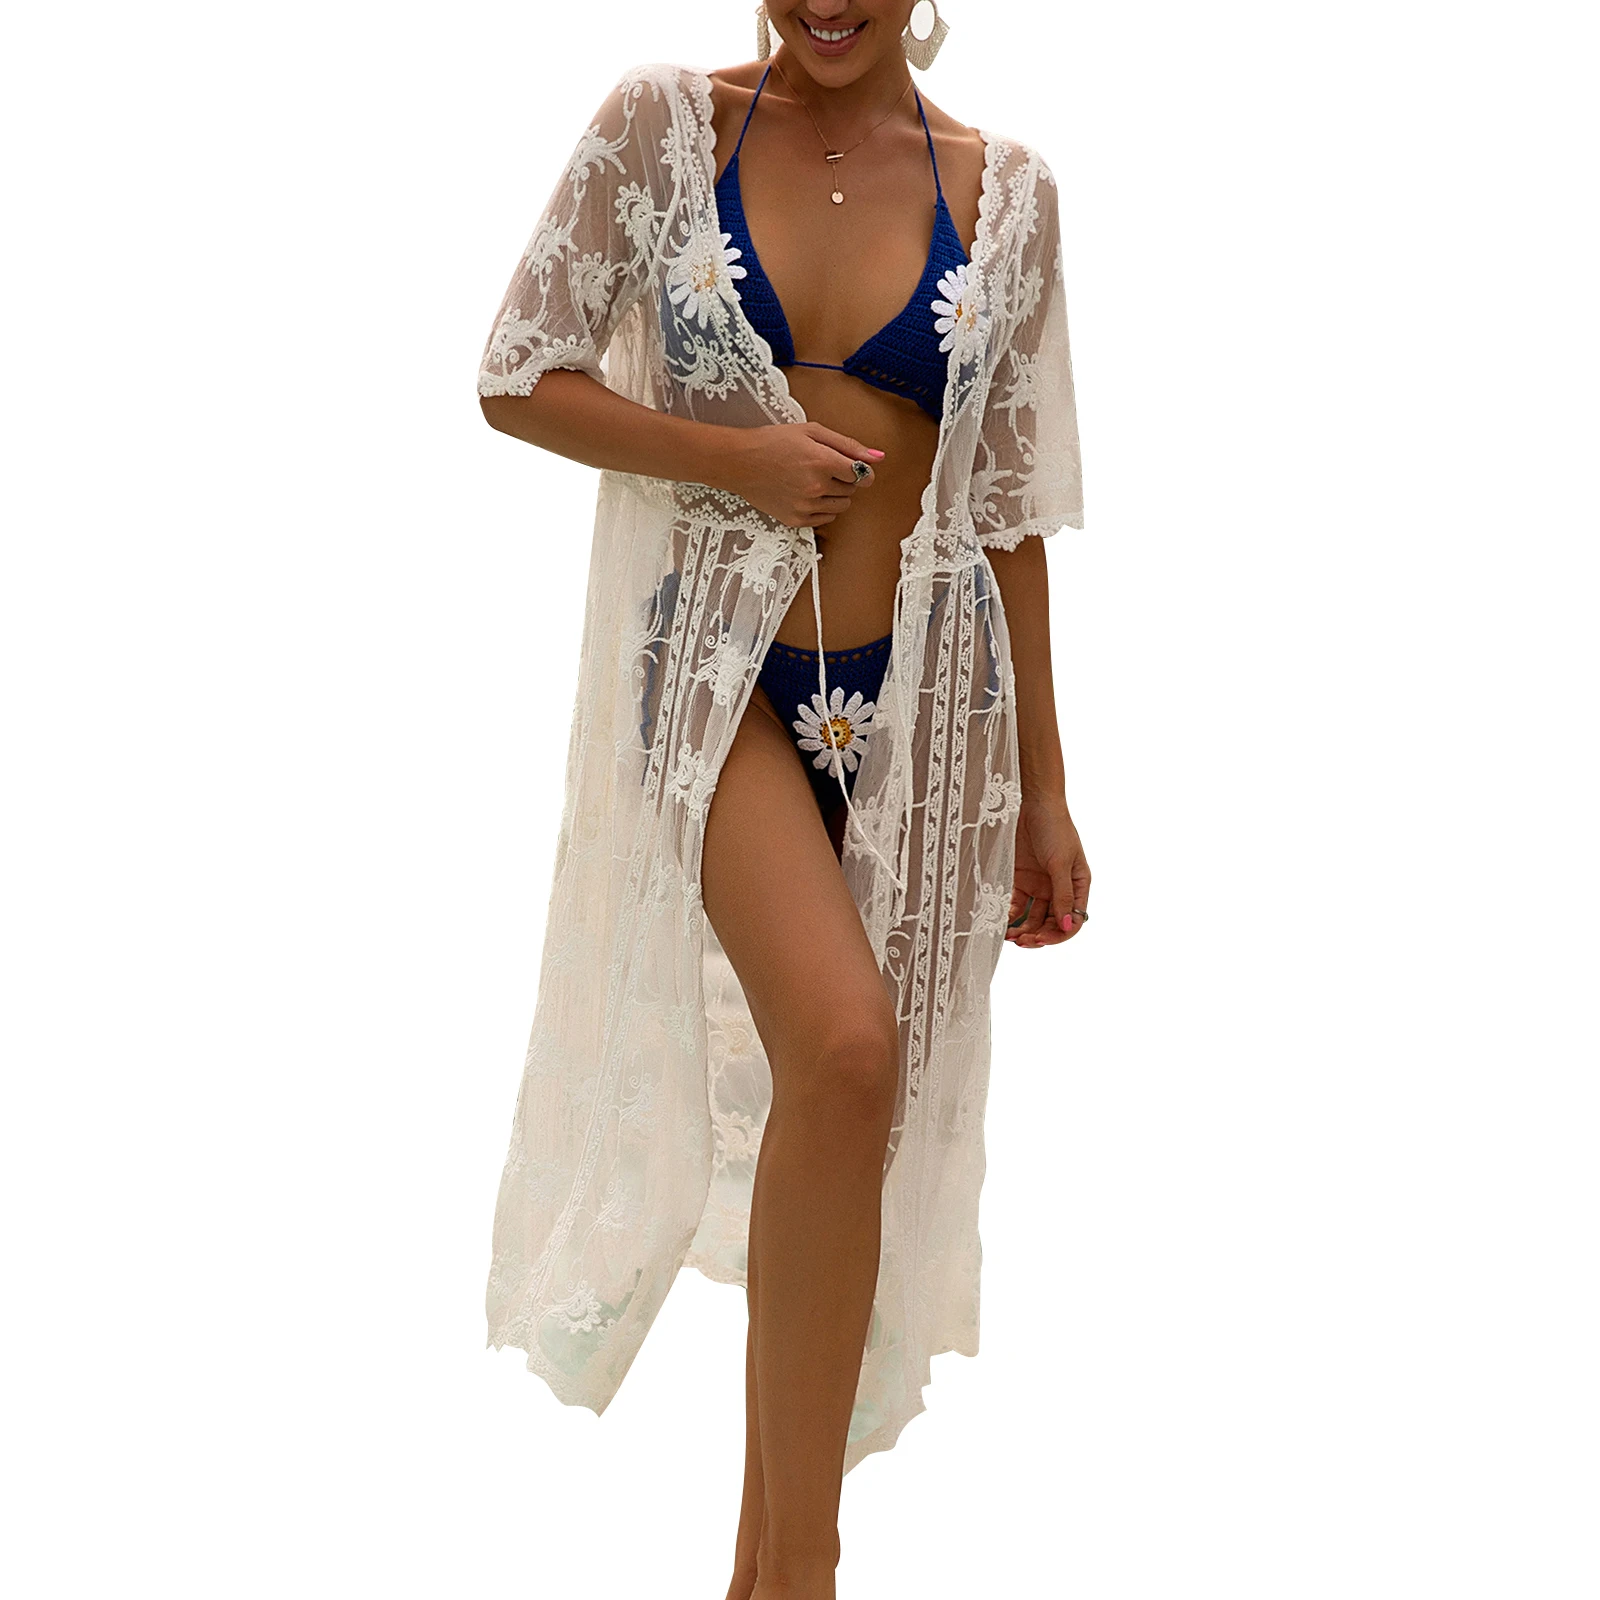 white bikini cover up Women Bikini Cover Ups Floral Deep V-Neck Short Sleeve Hollow Out Summer Clothes For Women cover up beachwear